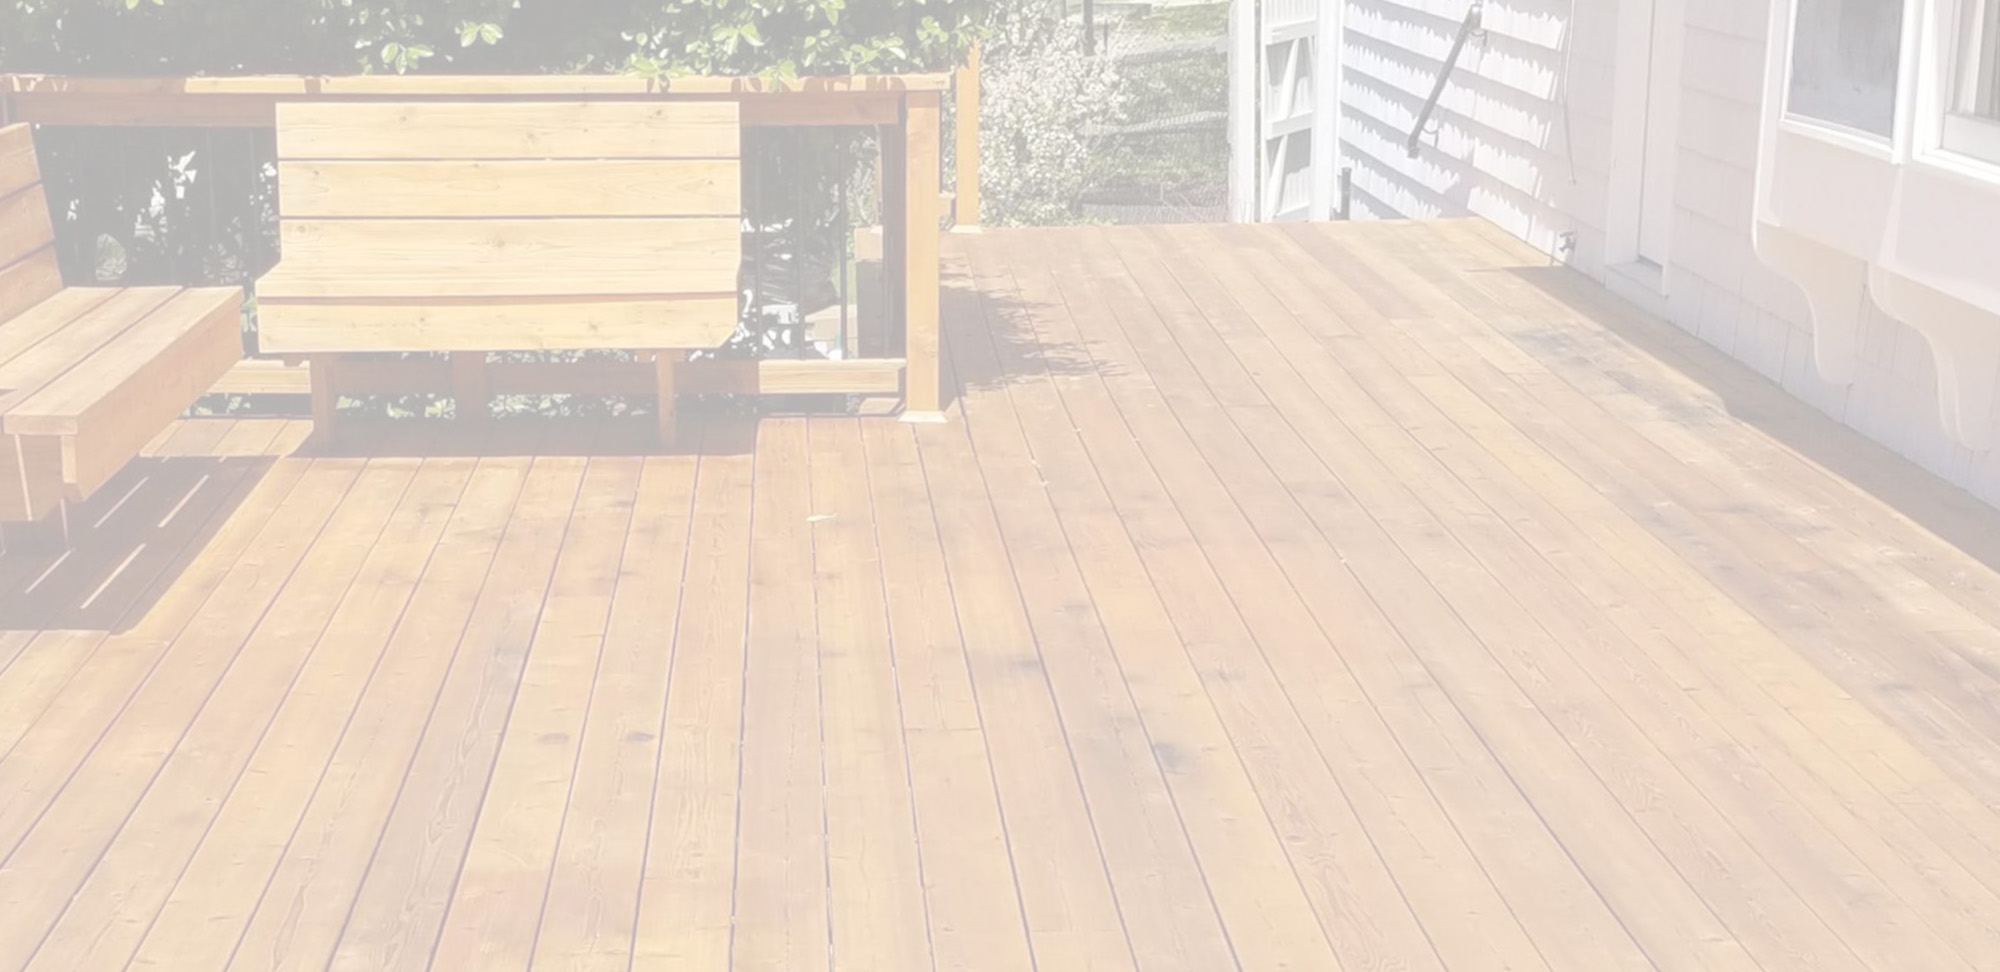 Can You Paint Pressure Treated Wood Easily?